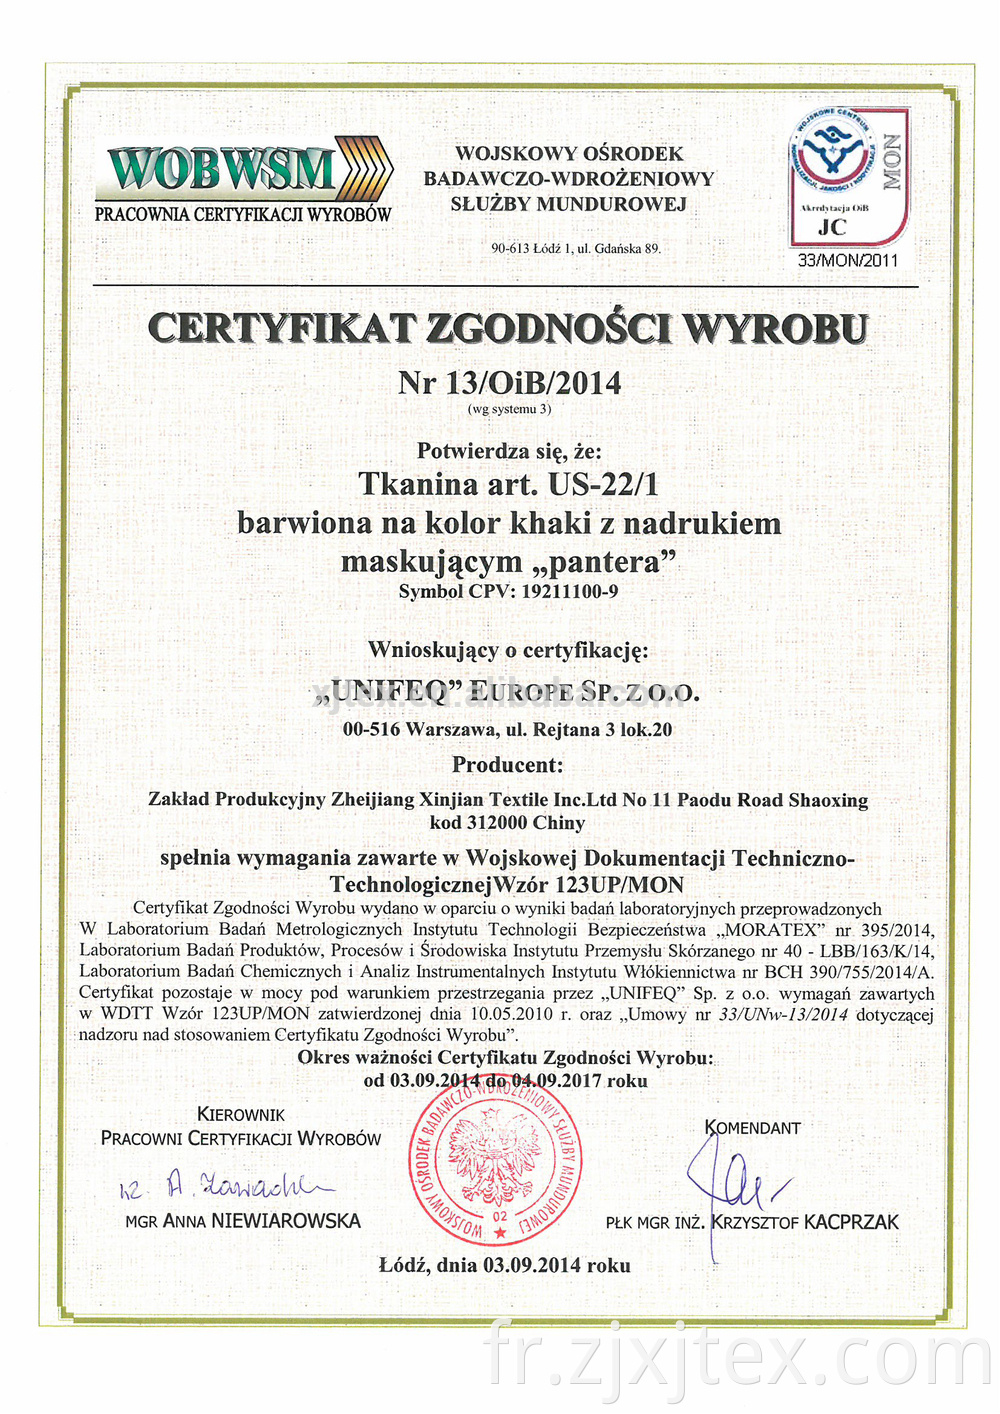 License from Polish army